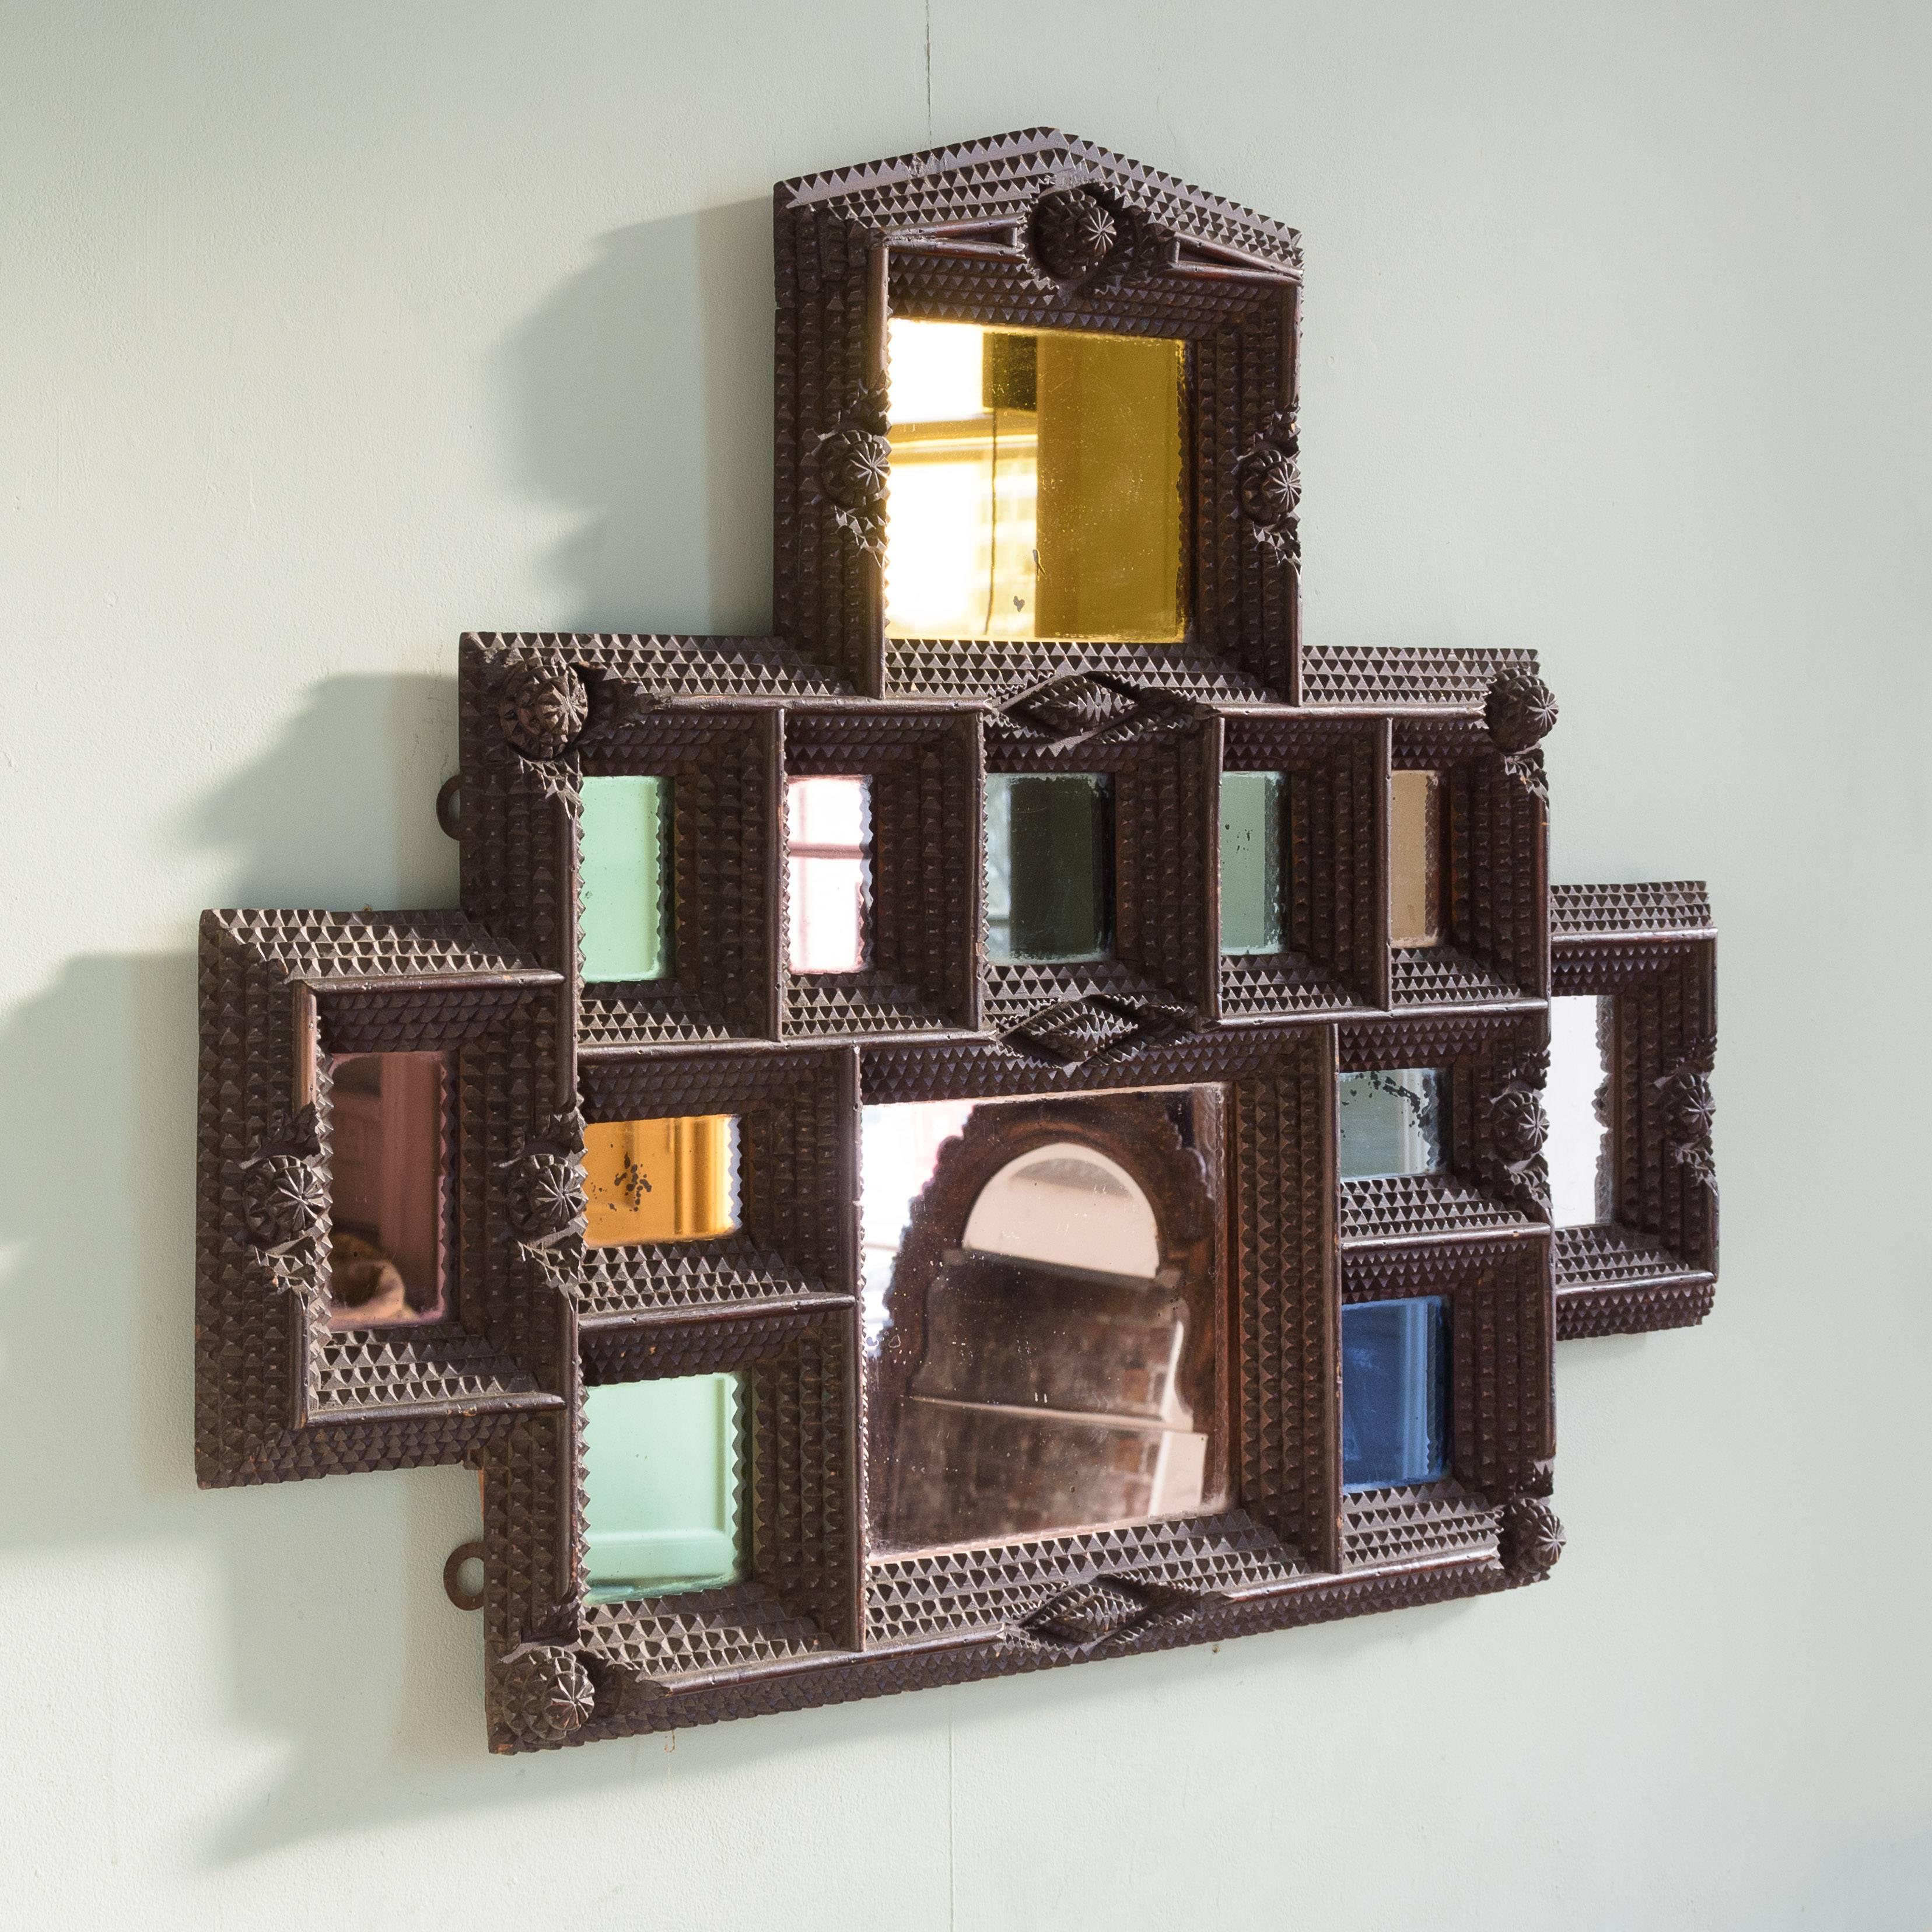 French (or possibly German) tramp art picture frame, circa 1890-1900, with all-over chip carving, with later inset colored mirror panels.

The name Tramp Art is misleading and is a modern re-branding of chip carved work made from found materials